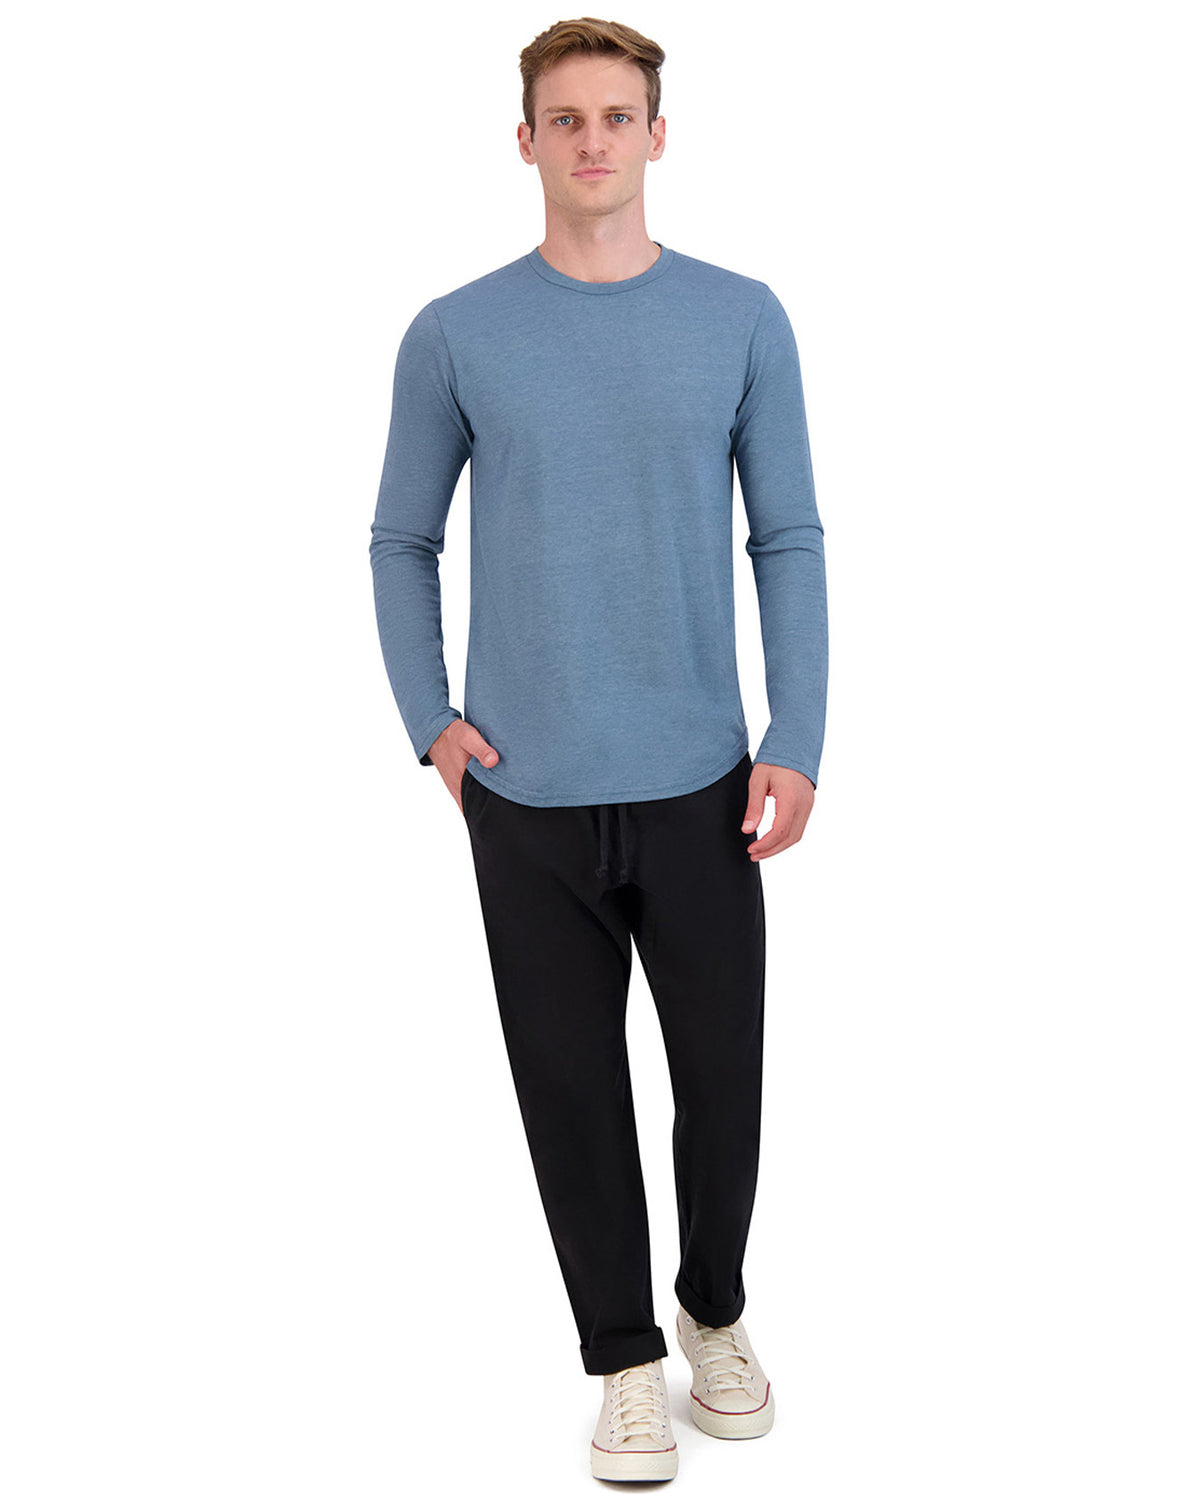 Long Sleeve Triblend Scallop Crew - Indian Teal